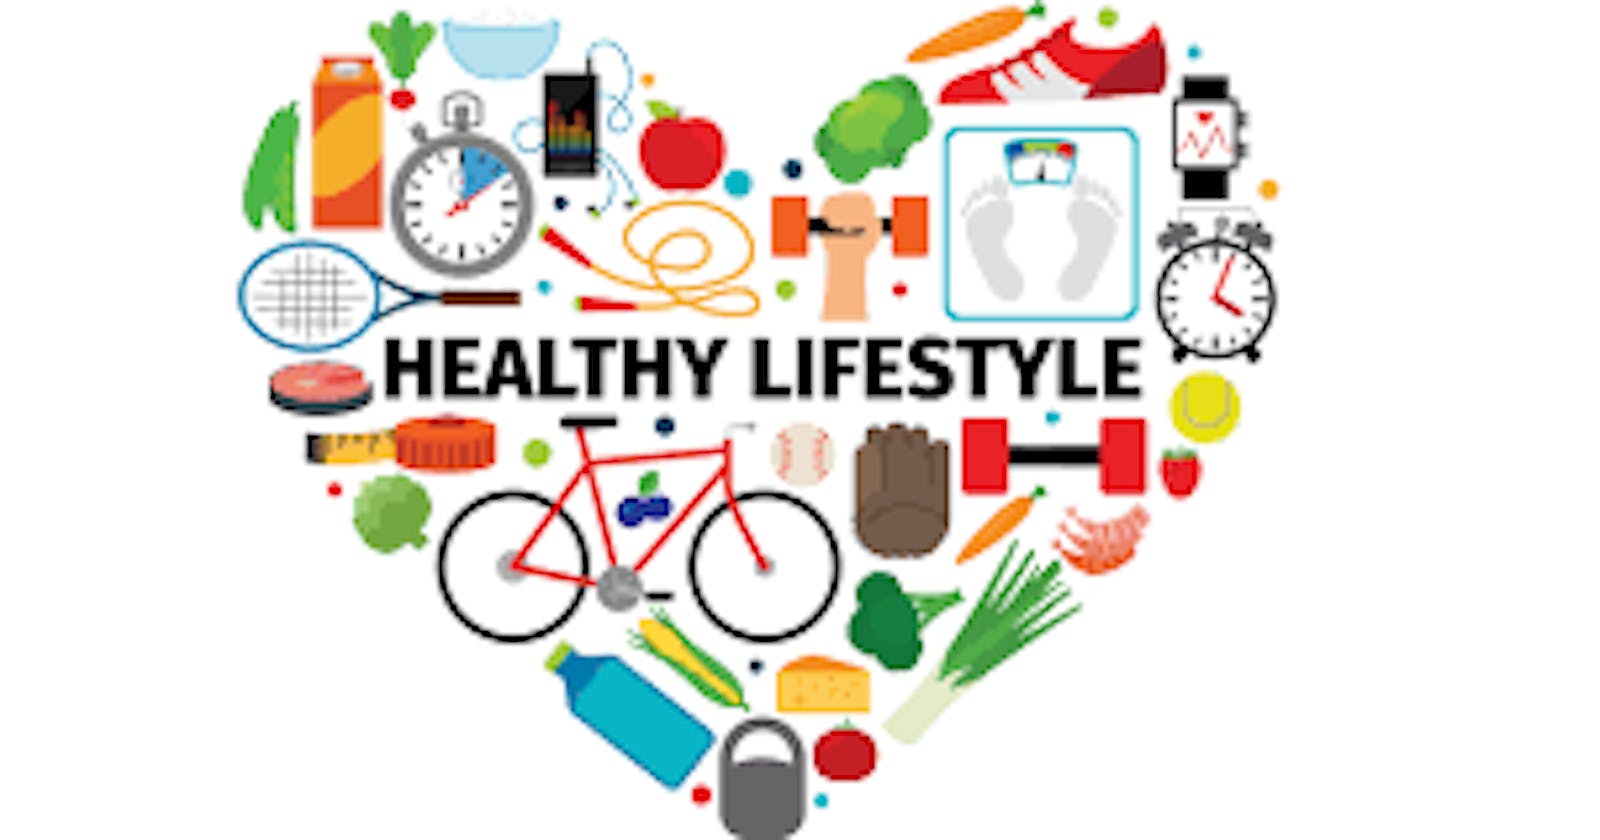 HOW TO MAINTAIN A HEALTHY LIFESTYLE AS AN IT PROFESSIONAL